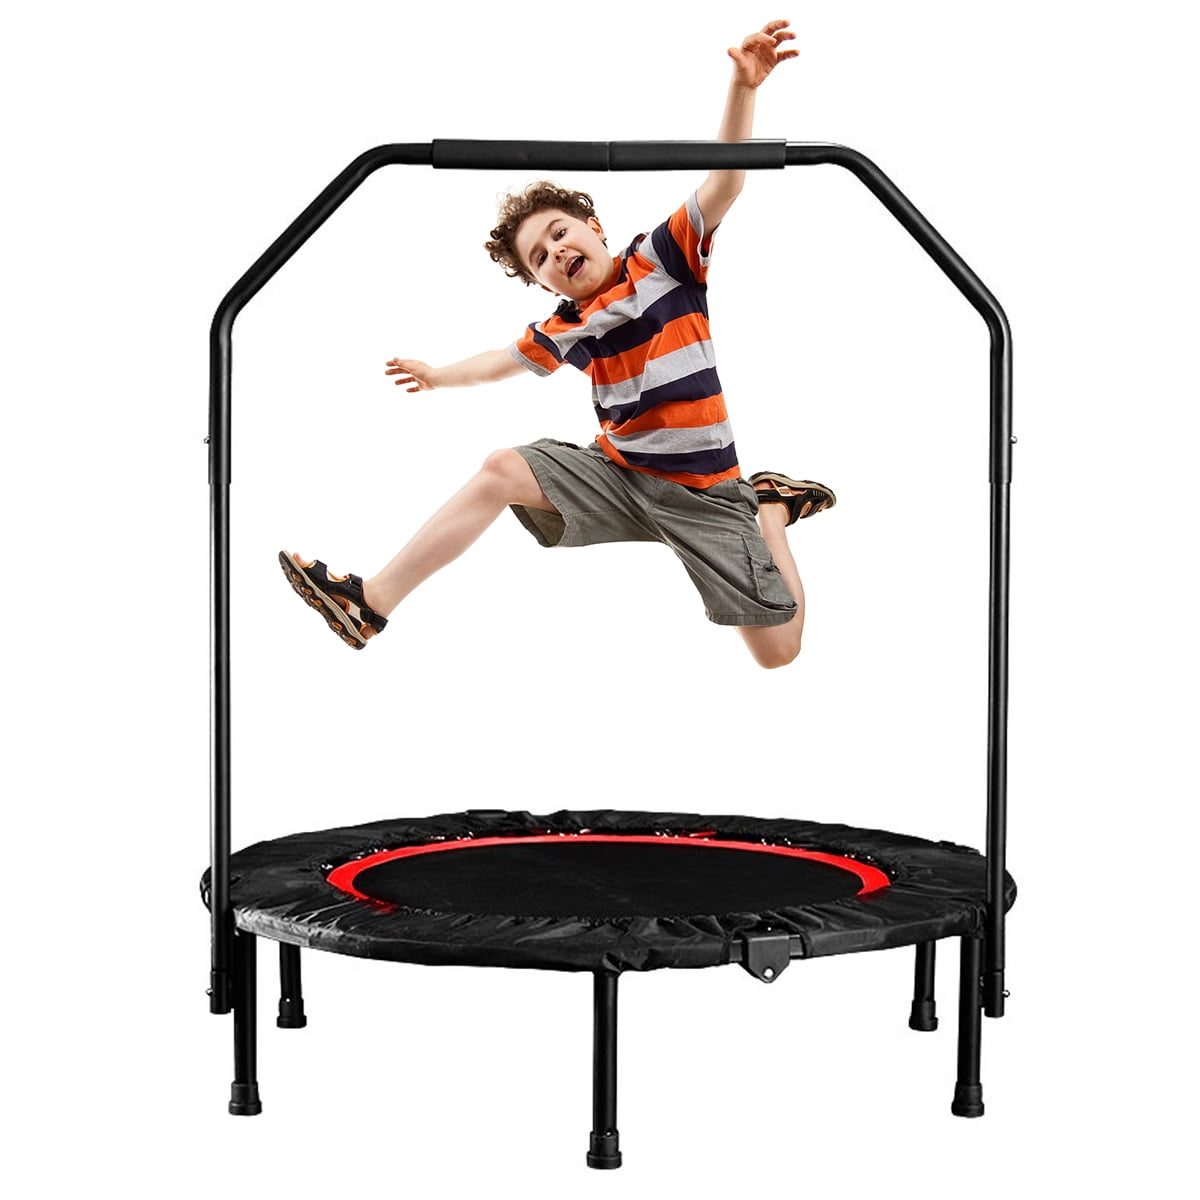 SINGES Mini Rebounder Trampoline Foldable Trampoline Indoor/Outdoor Cardio with Adjustable Handle for Kids Parent-Child (Max Load 330lbs)